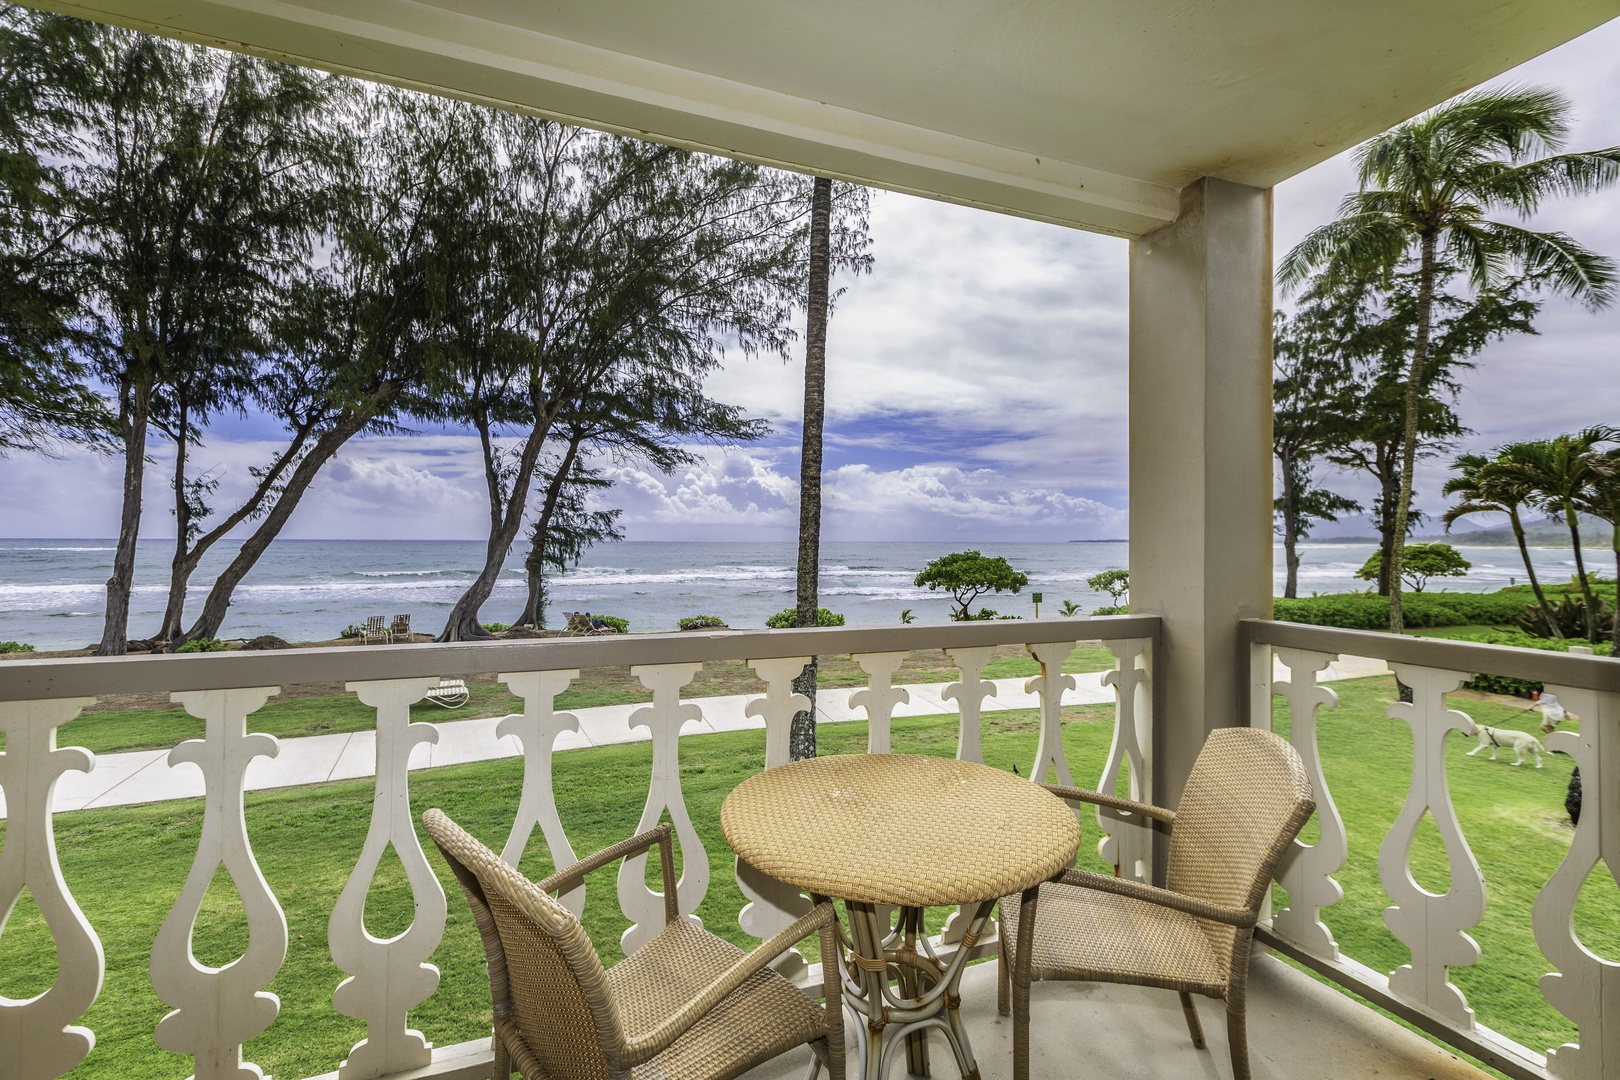 Kapa'a Vacation Rentals, Islander on the Beach #232 - Balcony with outdoor furniture